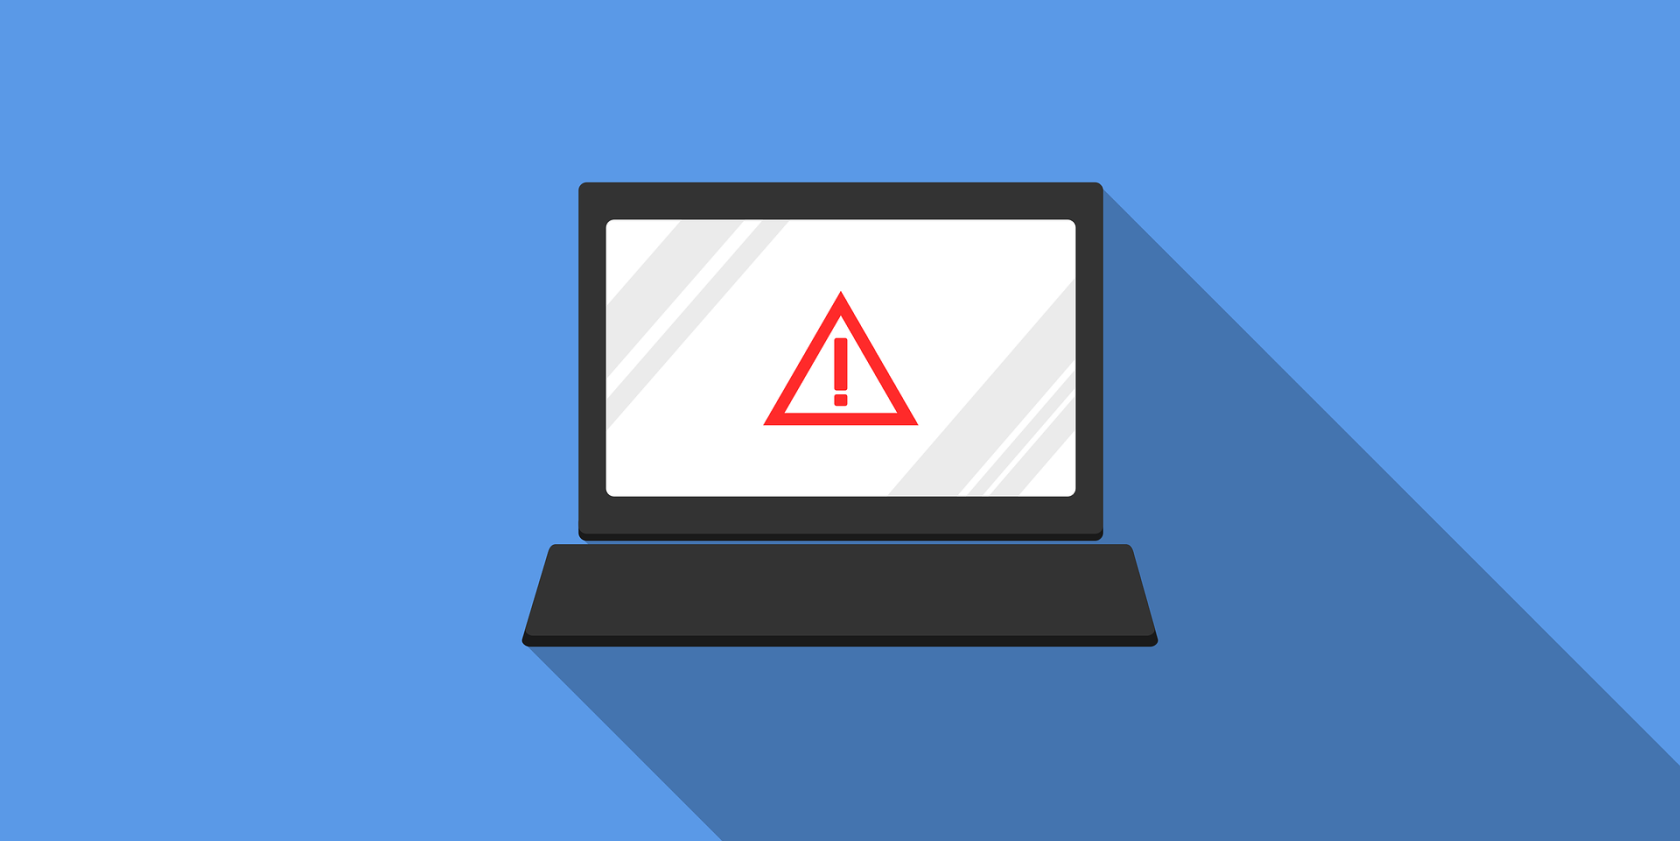 Alert icon on a computer